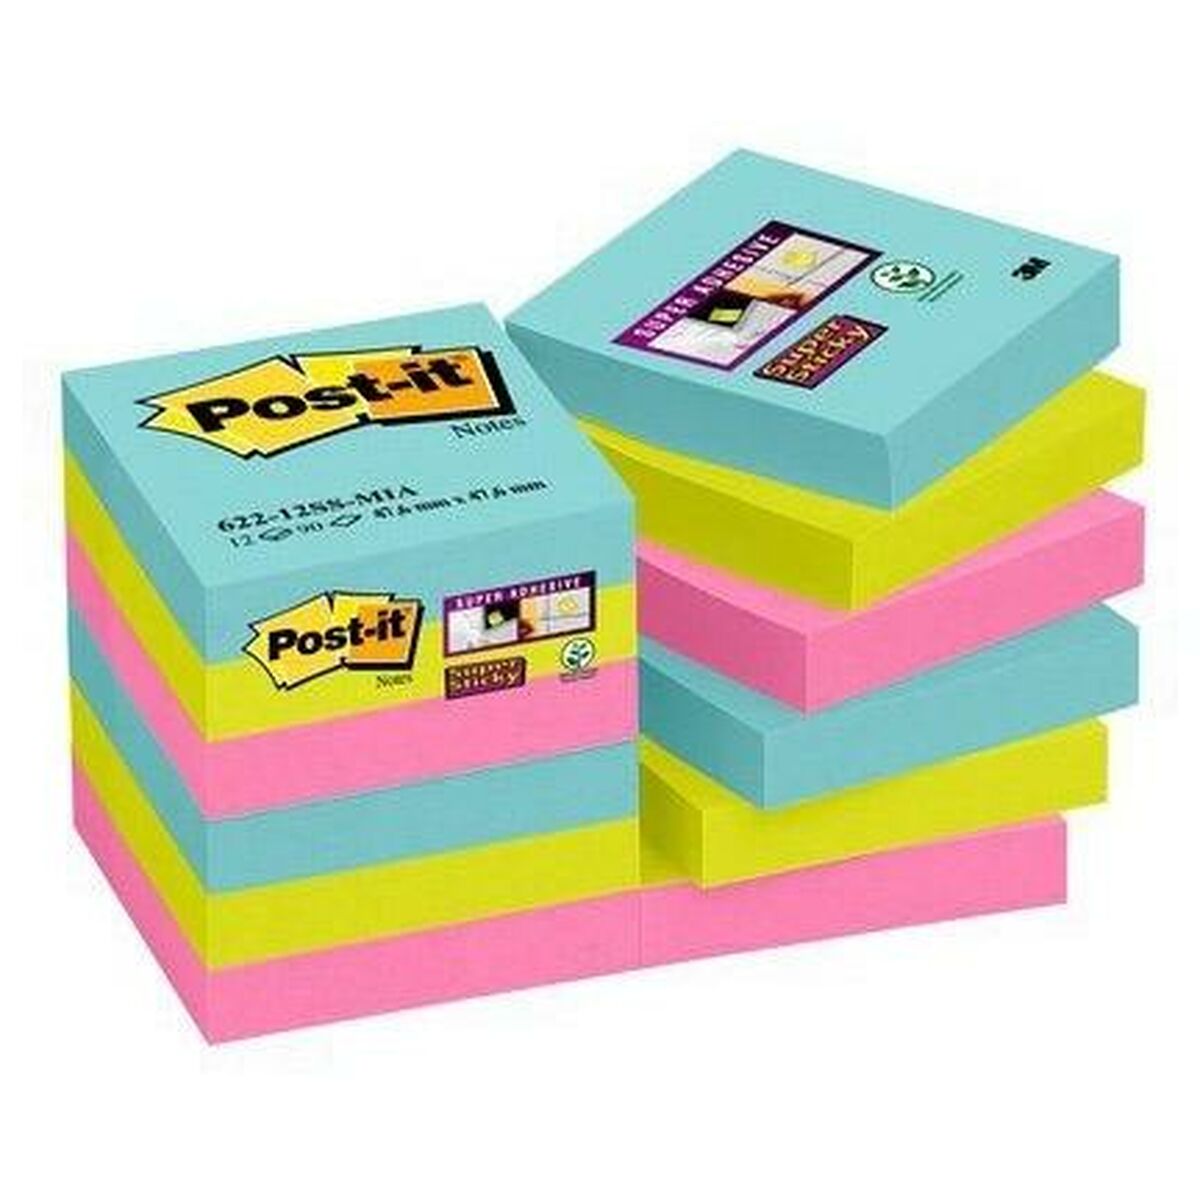 Set of Sticky Notes Post-it Super Sticky Multicolour 12 Pieces 47,6 x 47,6 mm (2 Units)